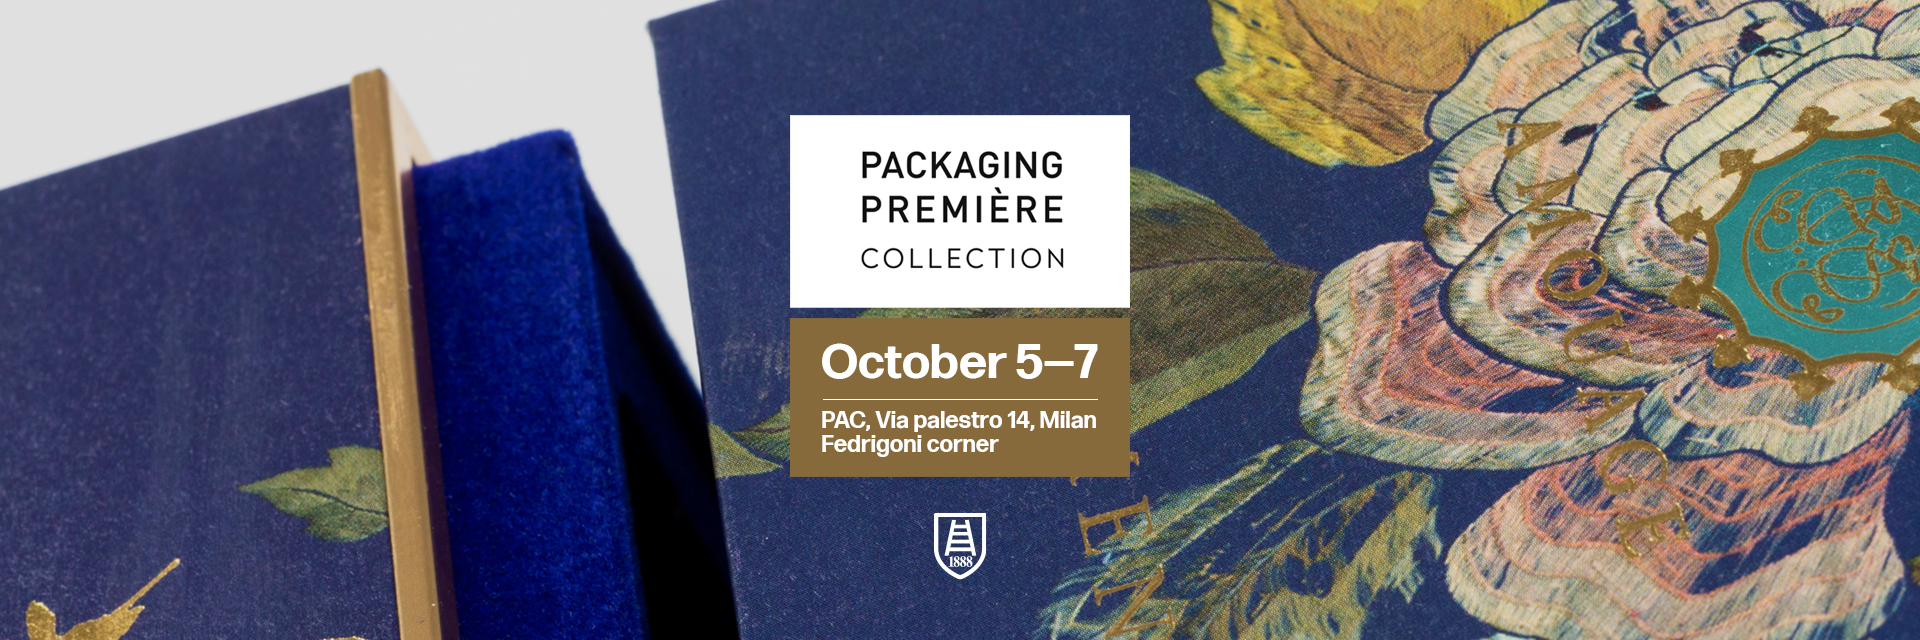 Our luxury solutions at Packaging Premiere